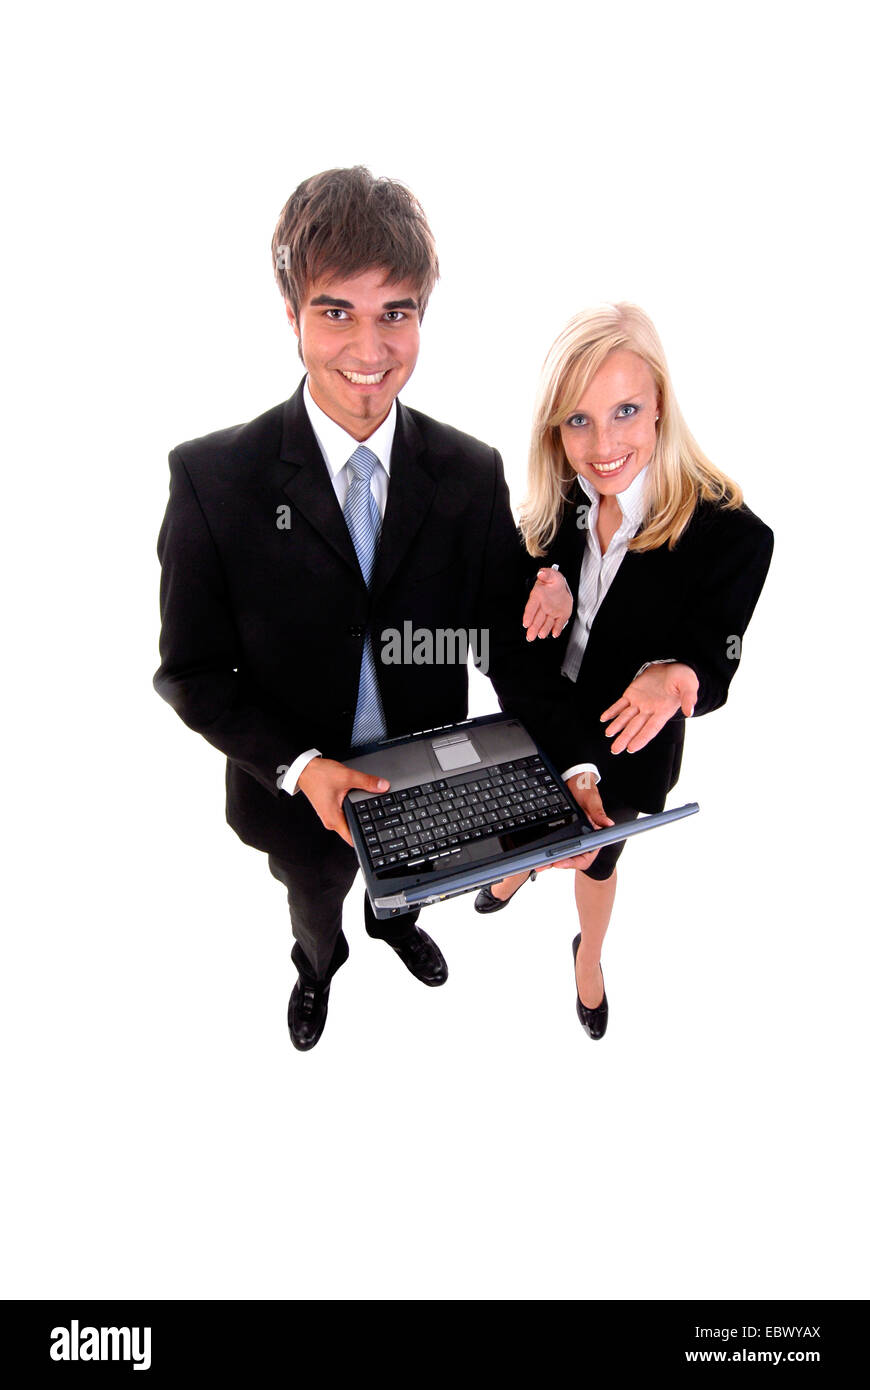 successful business pair with a laptop Stock Photo